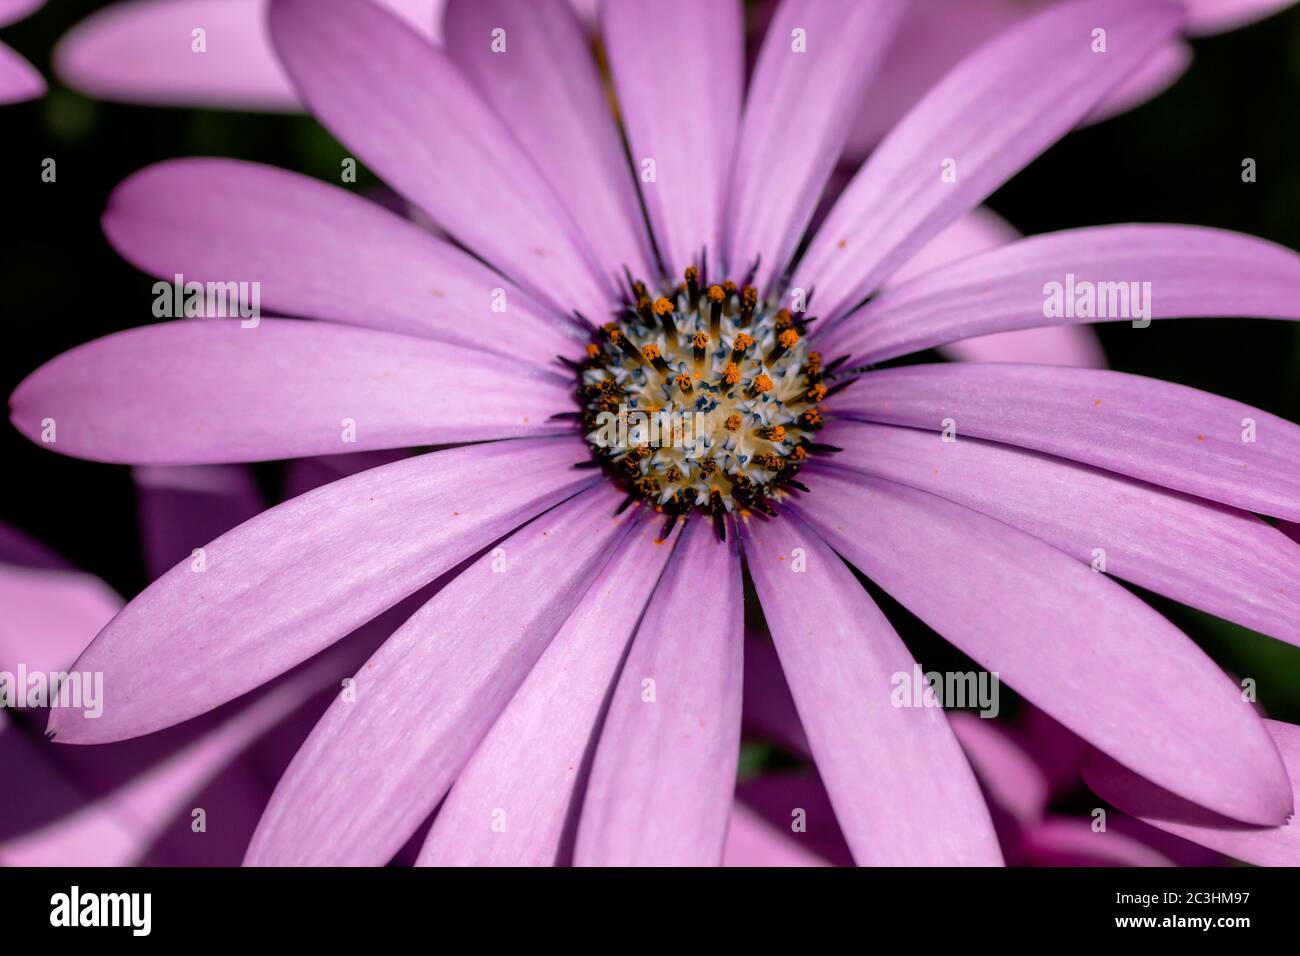 Detail of african daisy pink purplish flower blooming in spring Stock Photo